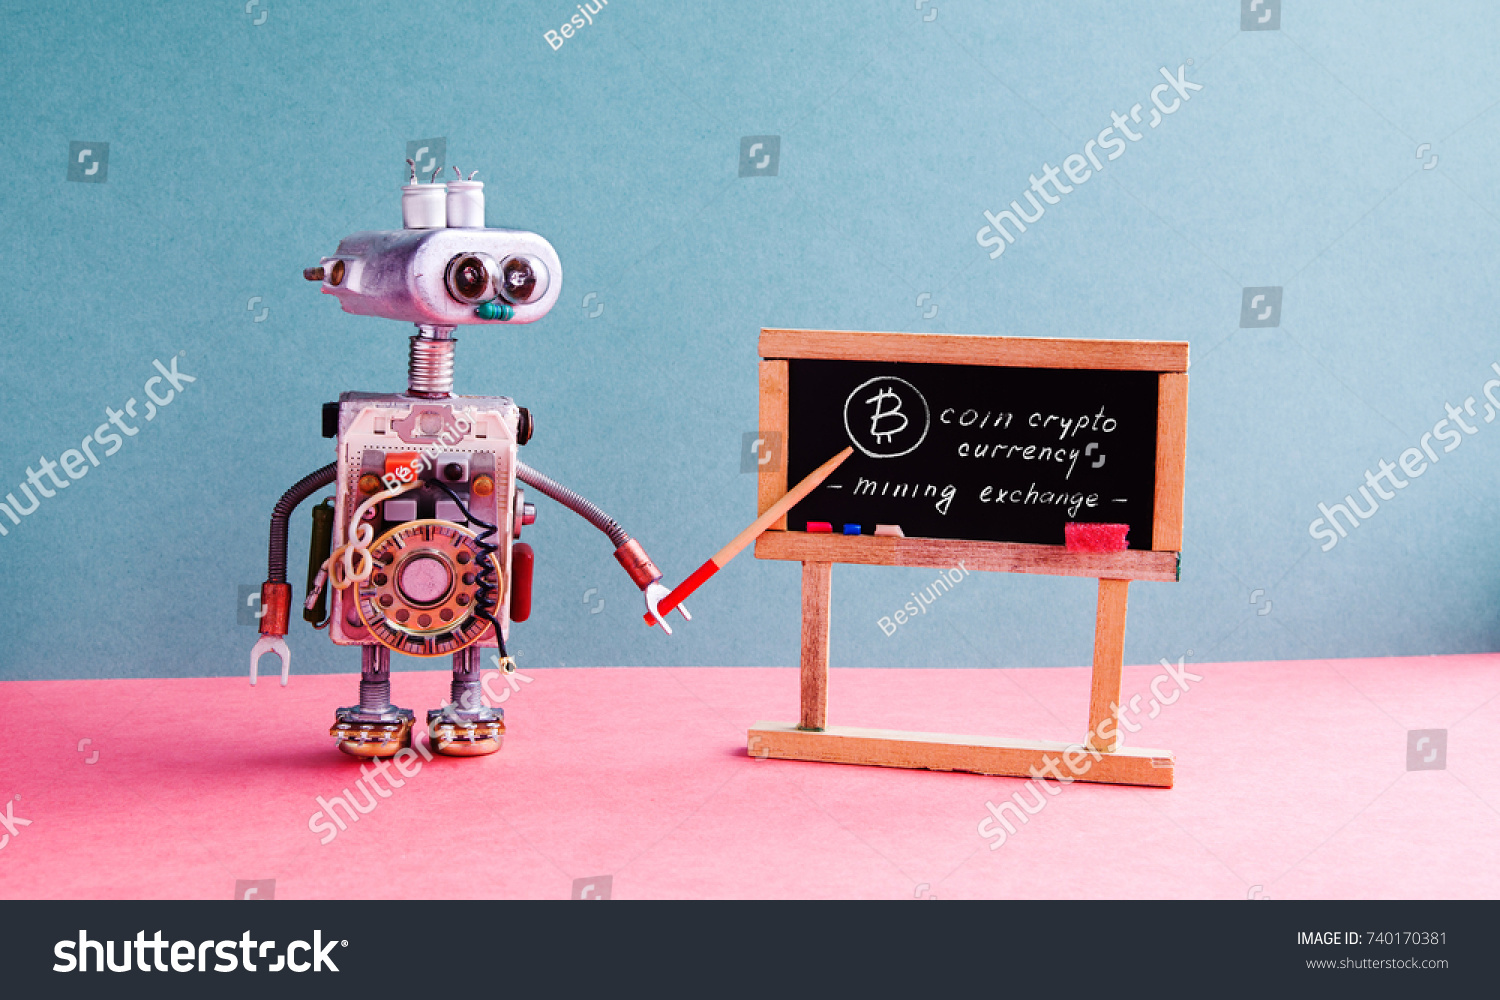 Bitcoin cryptocurrency digital money concept. Robot professor explains electronic mining cash financial system. Classroom interior with handwritten quote chalkboard. Blue pink colorful background. #740170381